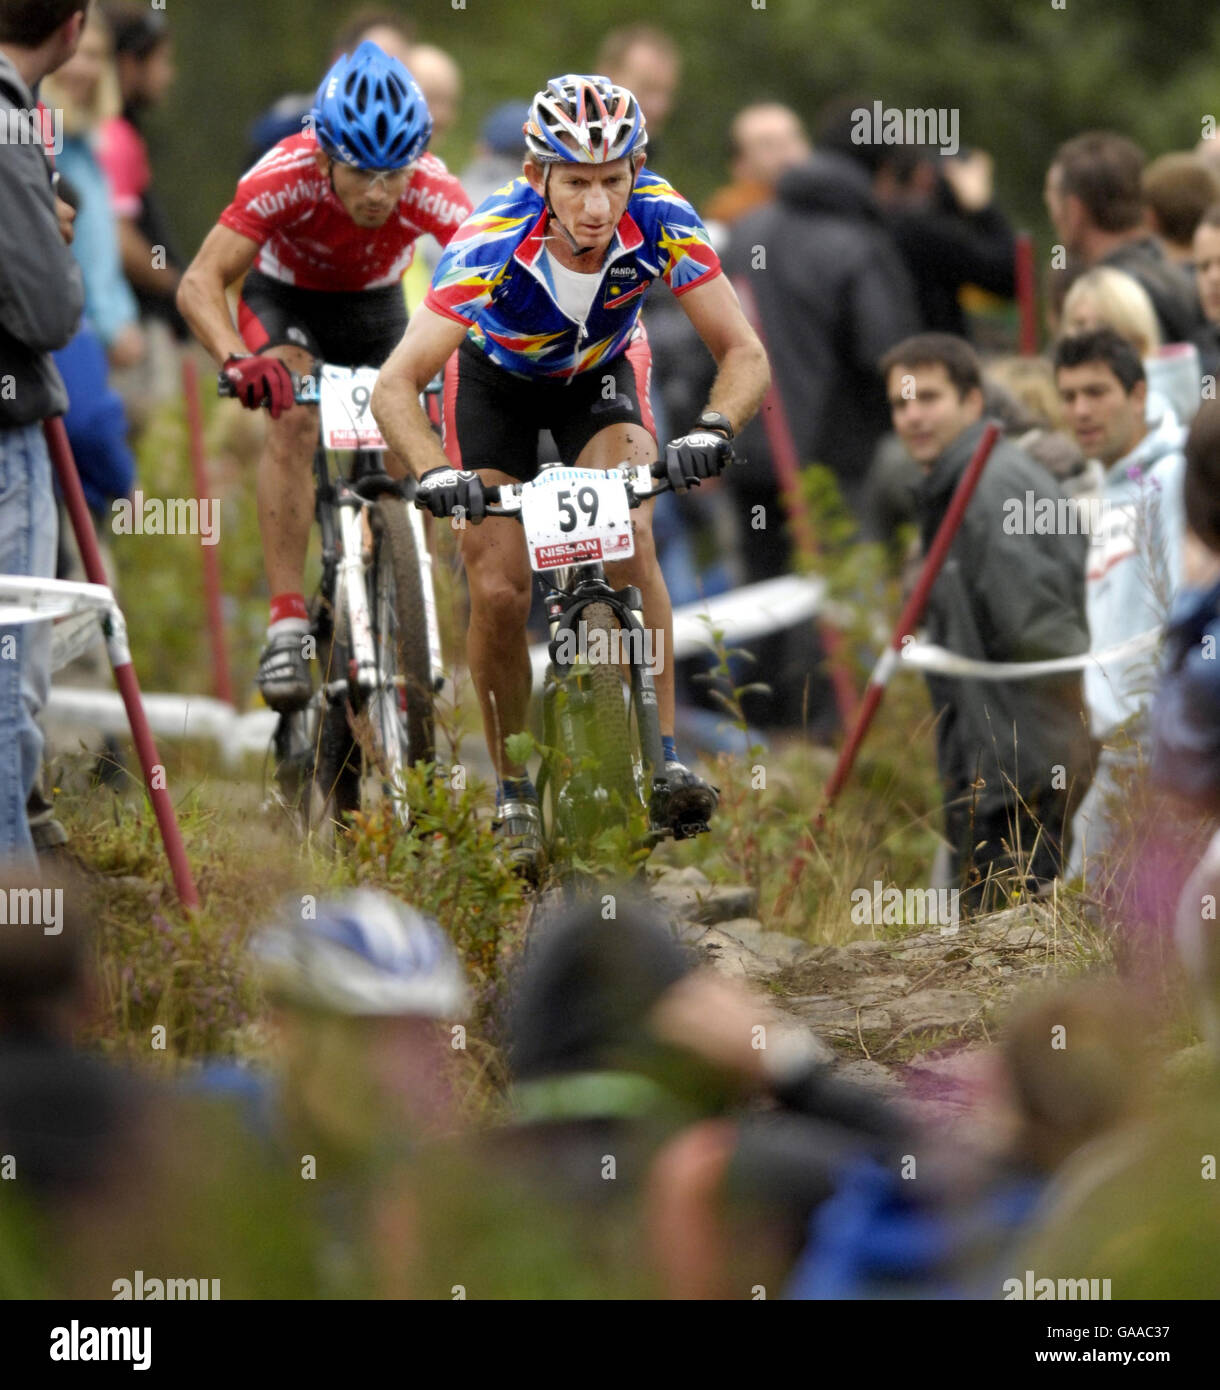 STANDALONE Photo. Mannie Heymans (front) competes part in the Elite Men's Cross Country during the UCI Mountain Bike Trials World Championships 2007, near Fort William, Scotland Stock Photo